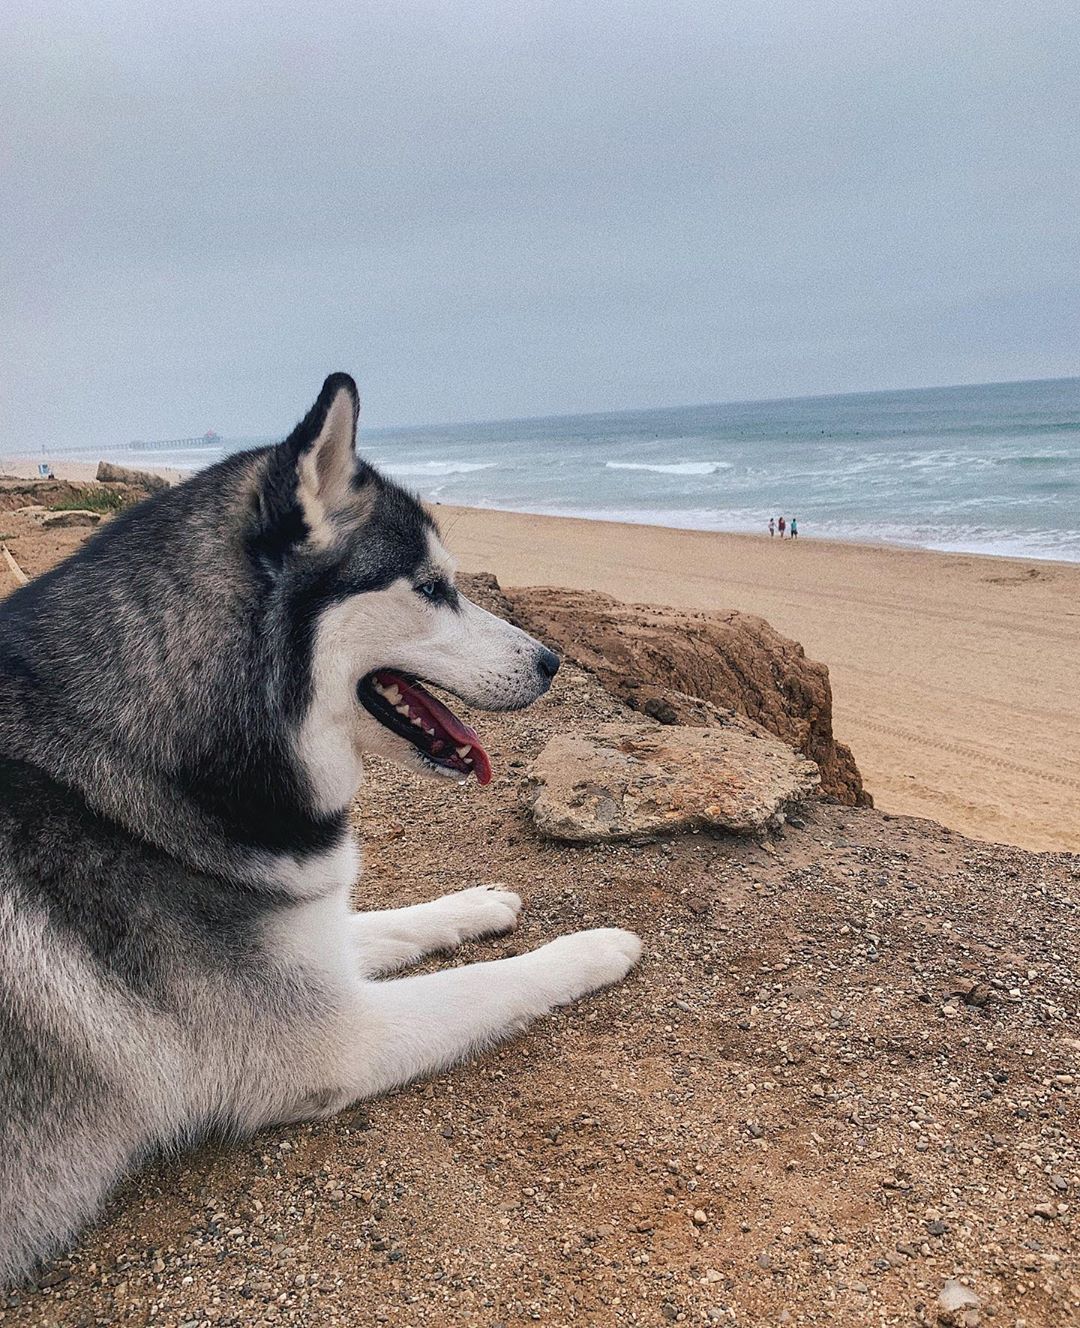 A Husky lying in the sand fronting the beach view